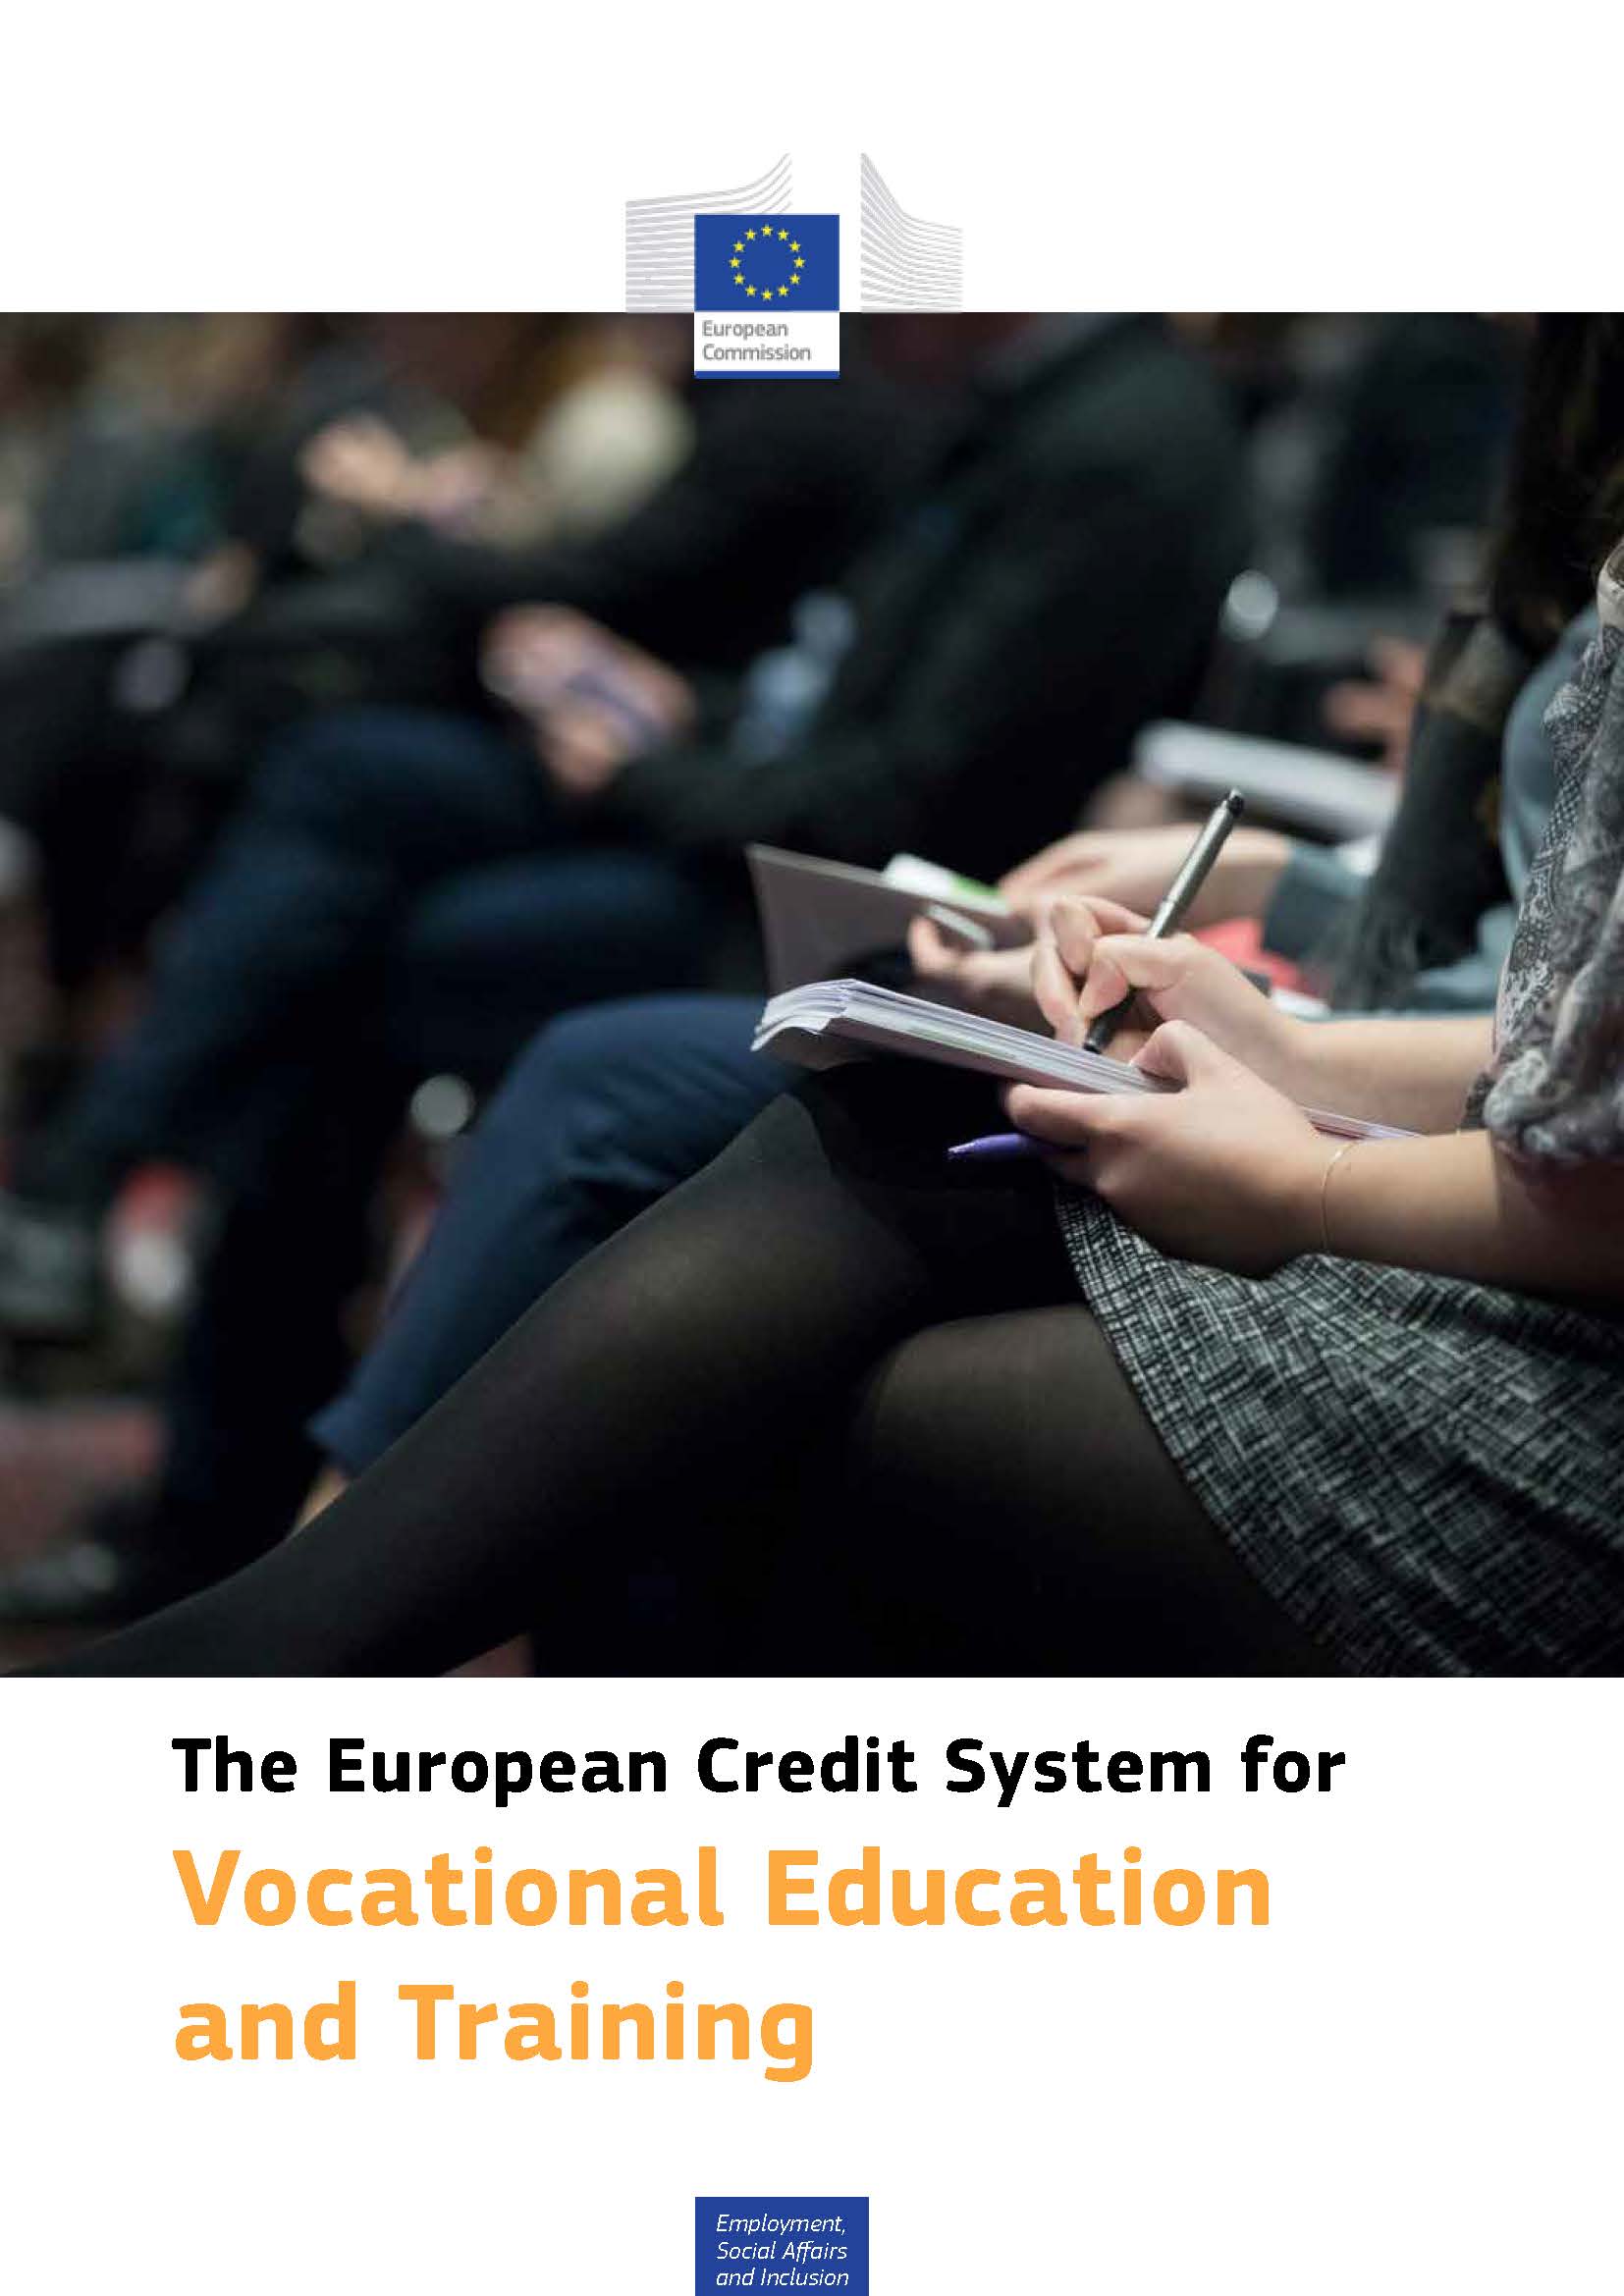 The European Credit System for Vocational Education and Training